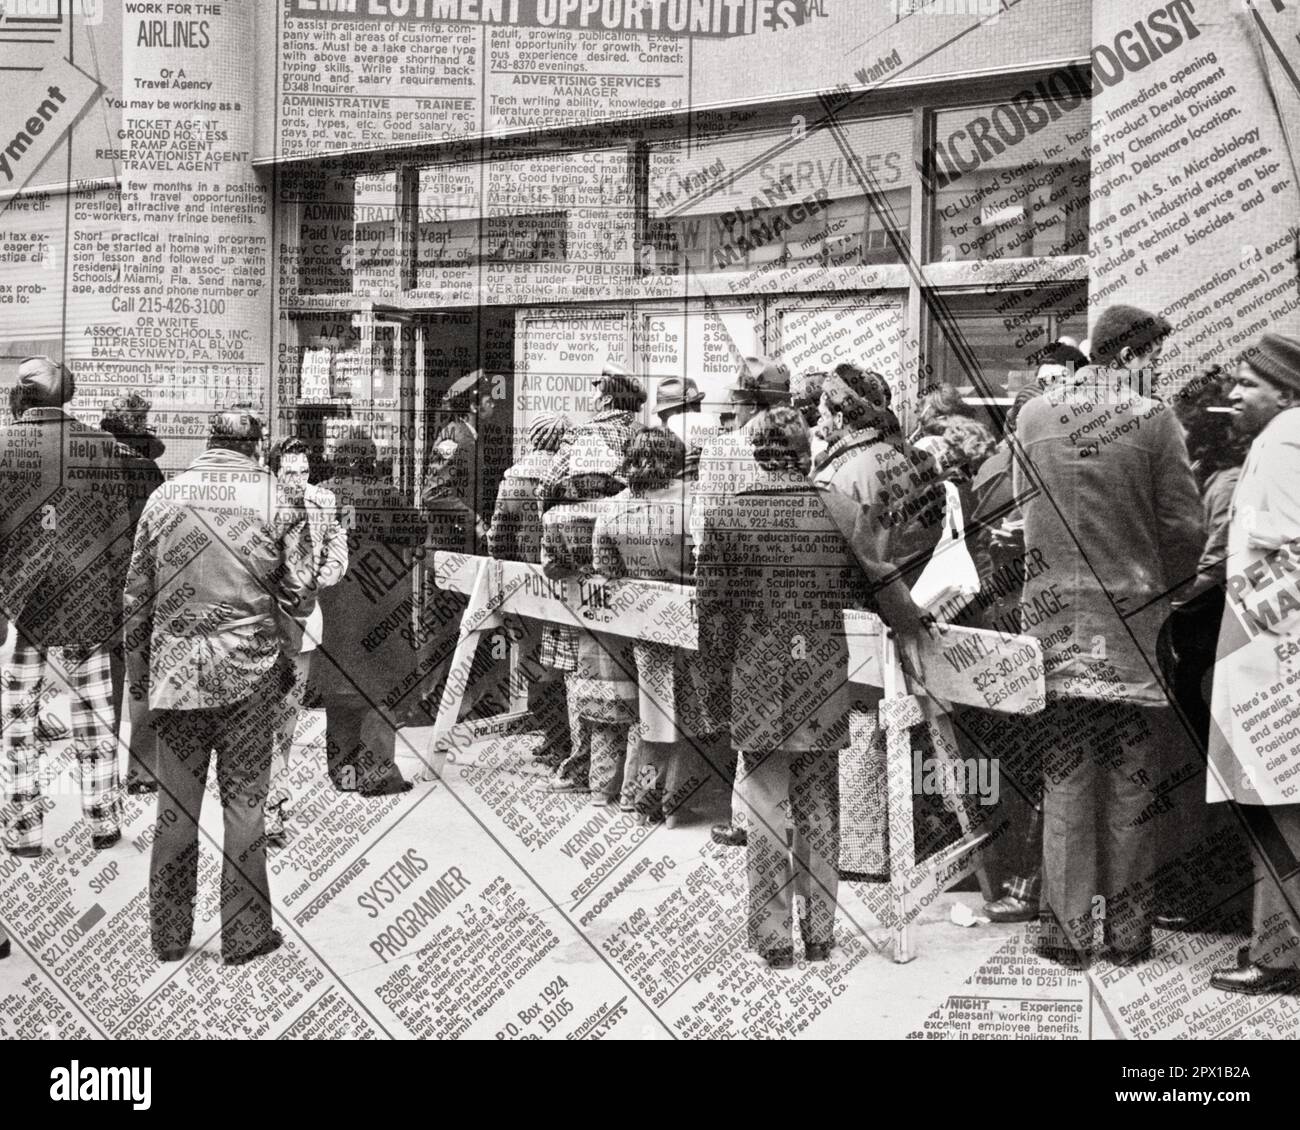 1960s GROUP OF PEOPLE STANDING IN LINE ALONG STREET WITH NEWSPAPER ADS OF EMPLOYMENT SUPERIMPOSED DURING 1960 &1961 RECESSIONS - w6063 HAR001 HARS MONTAGE DIFFERENT LIFESTYLE FEMALES JOBS UNITED STATES COPY SPACE FULL-LENGTH LADIES PERSONS UNITED STATES OF AMERICA MALES B&W NORTH AMERICA NORTH AMERICAN SKILL DREAMS OCCUPATION SKILLS WELFARE AFRICAN-AMERICANS AFRICAN-AMERICAN NETWORKING ALONG COMPOSITE EXTERIOR BLACK ETHNICITY OPPORTUNITY 1961 EMPLOYMENT OCCUPATIONS POLITICS HARD TIMES CONCEPTUAL ADS BENEFITS SUPPORT VARIOUS BUREAUCRACY DISADVANTAGED VARIED COOPERATION DISAFFECTED DISAPPOINTED Stock Photo